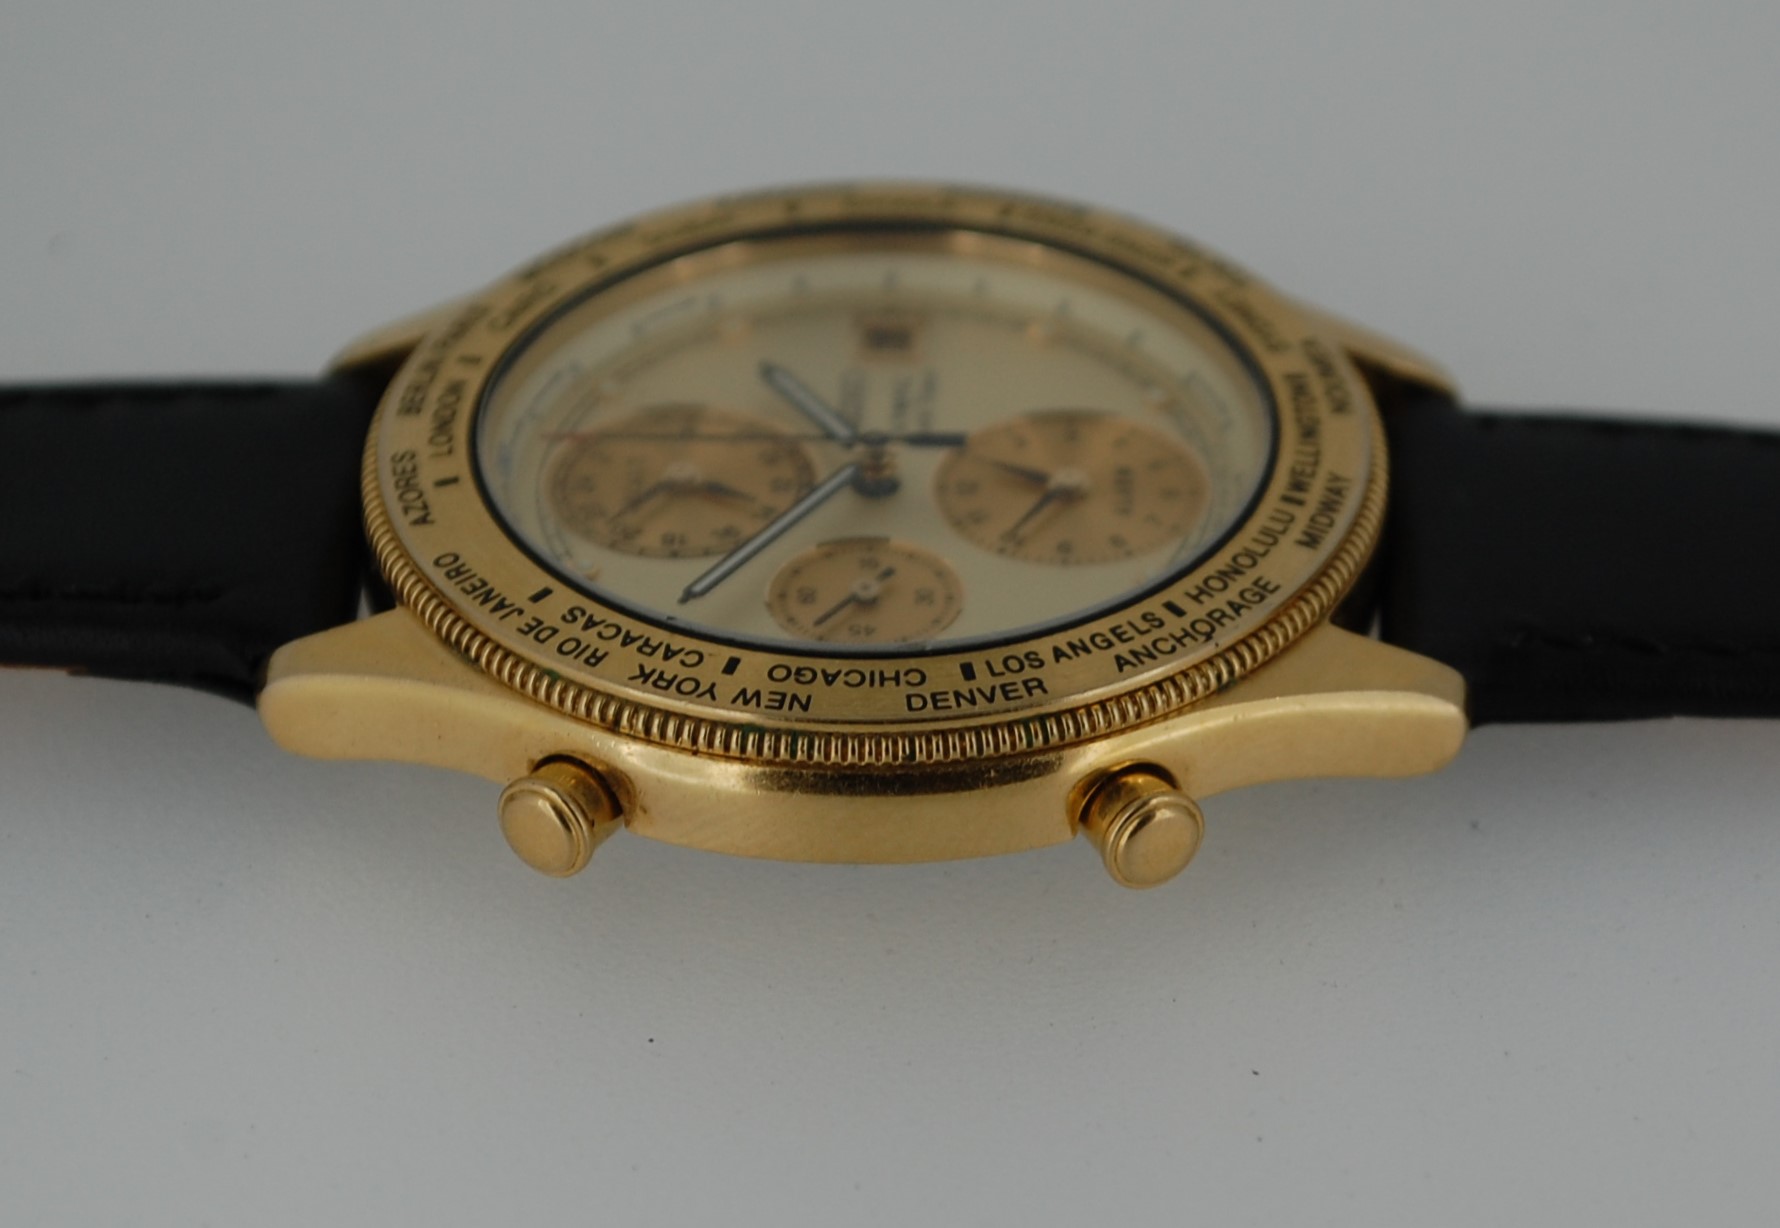 SOLD 1991 Seiko Olympic World Timer - Birth Year Watches